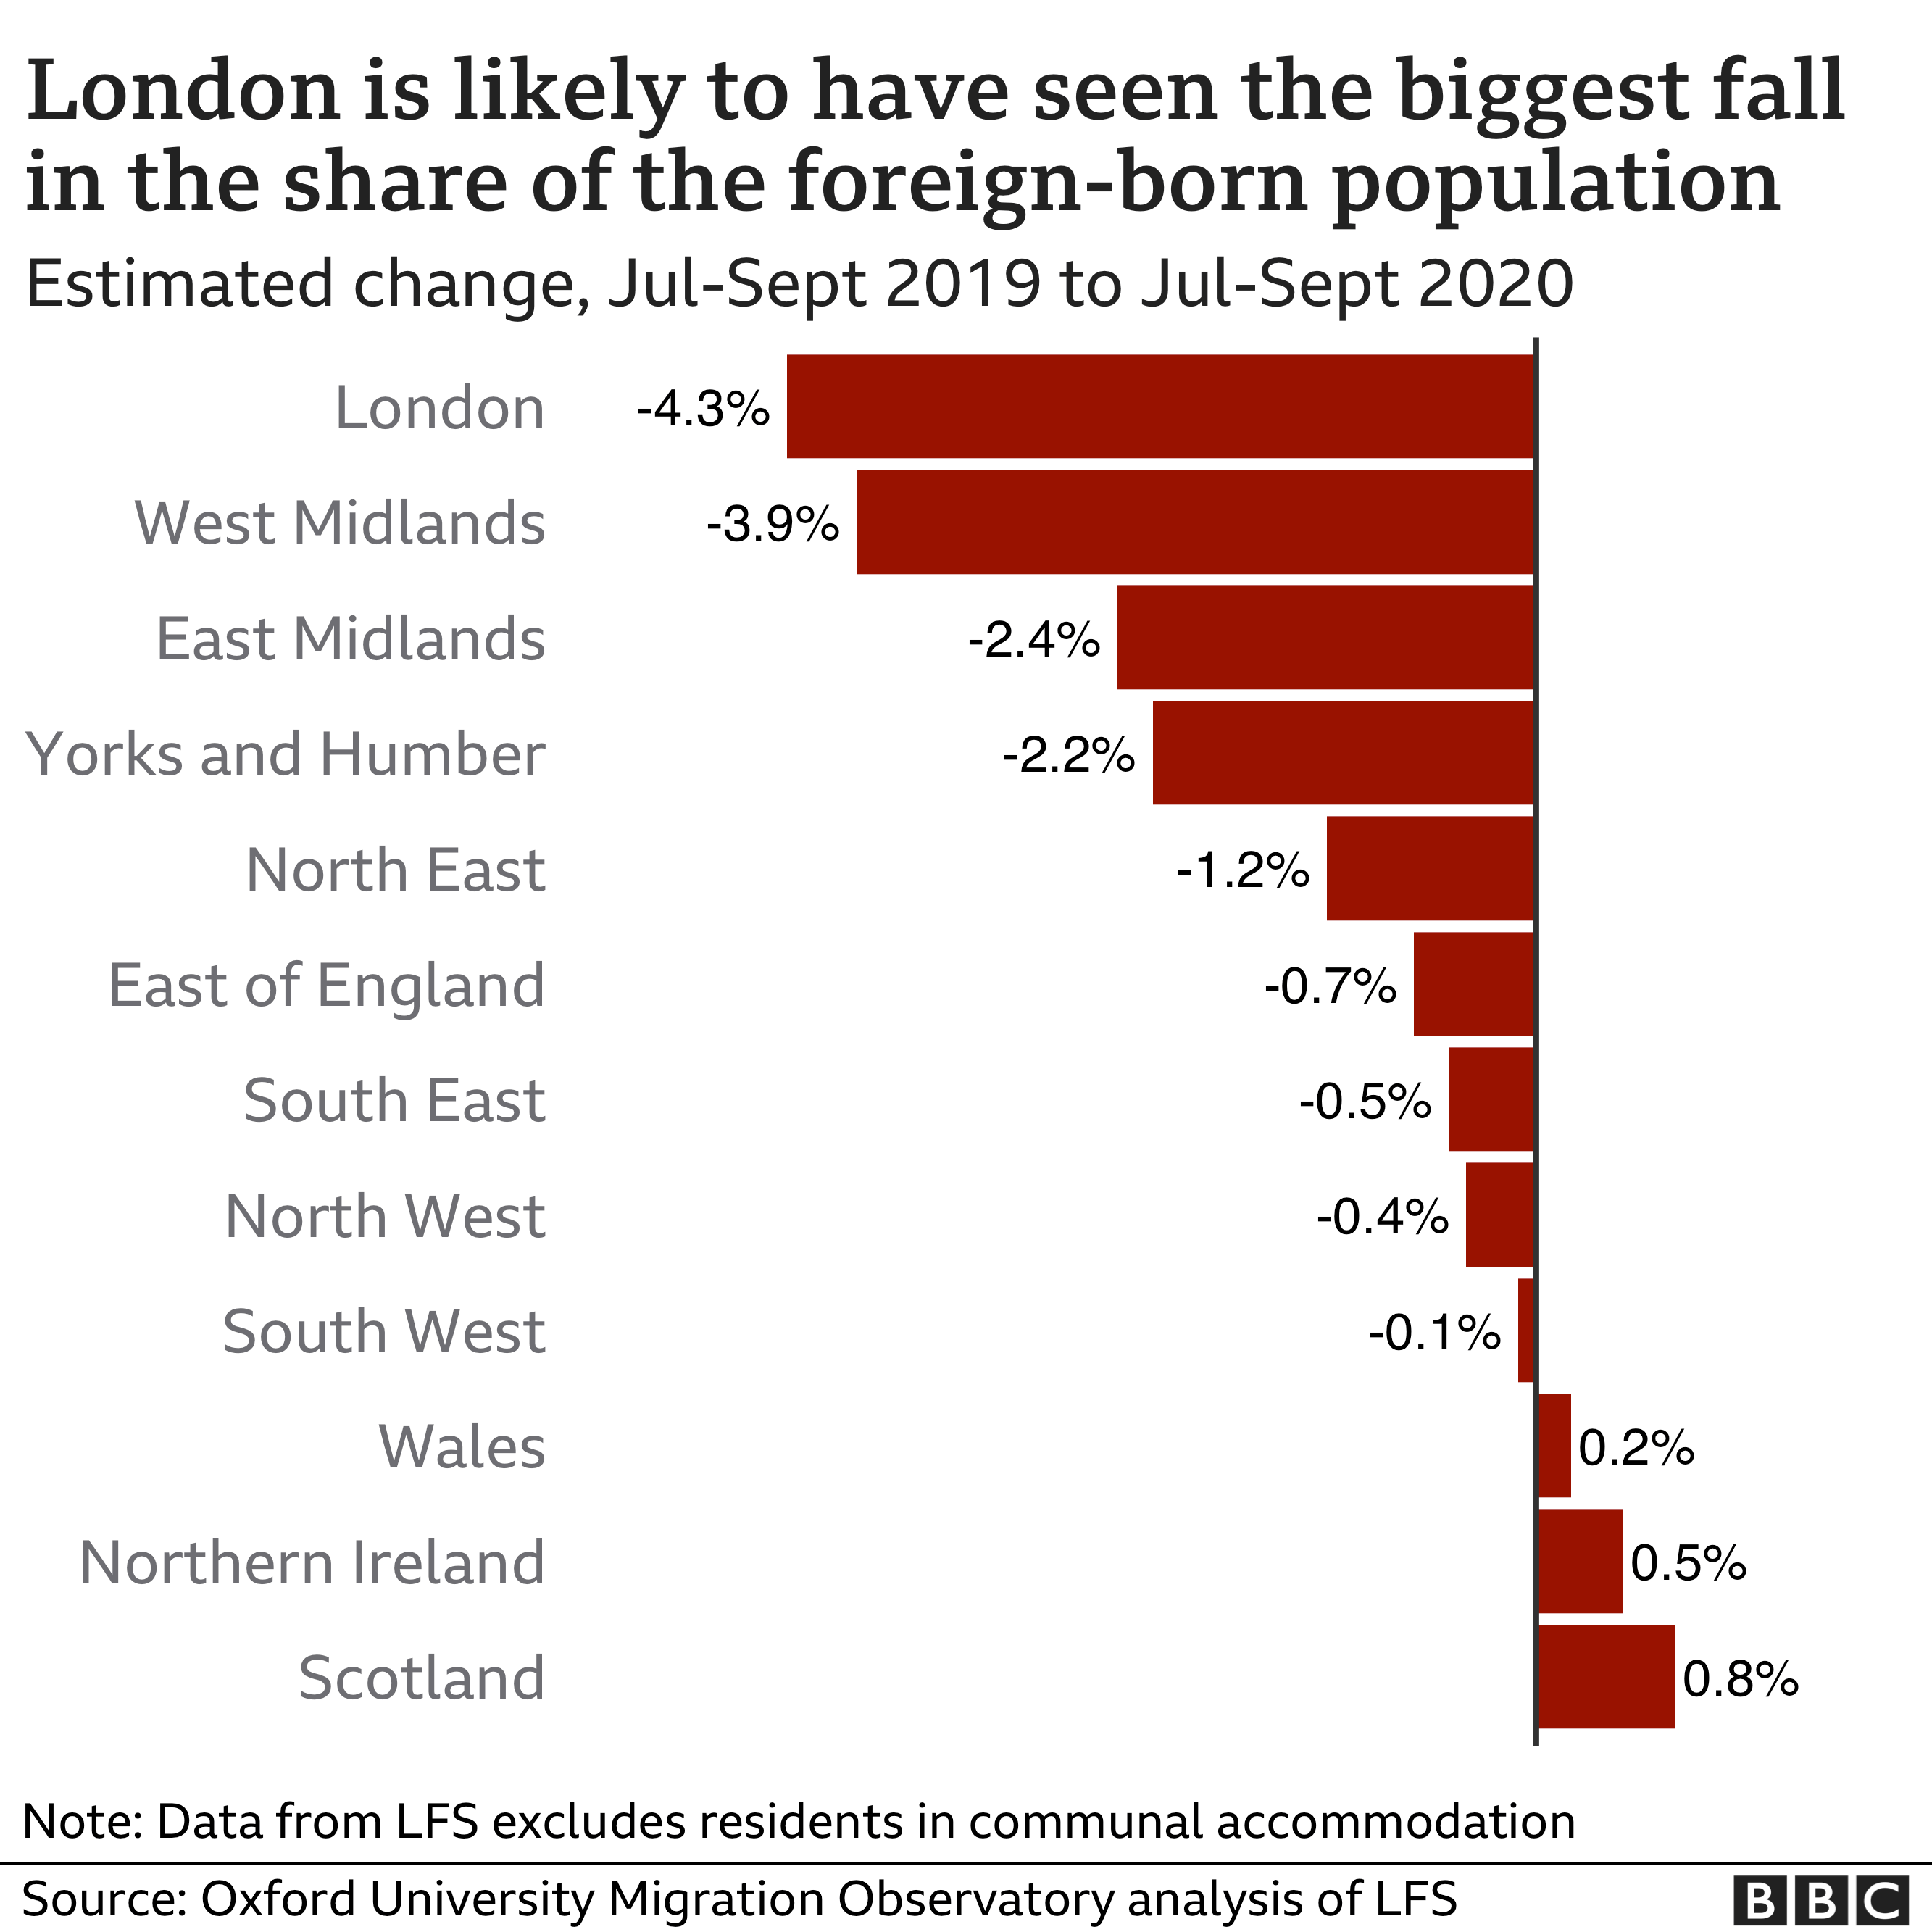 Chart showing that London is likely to have seen the biggest fall in the share of the foreign-born population.